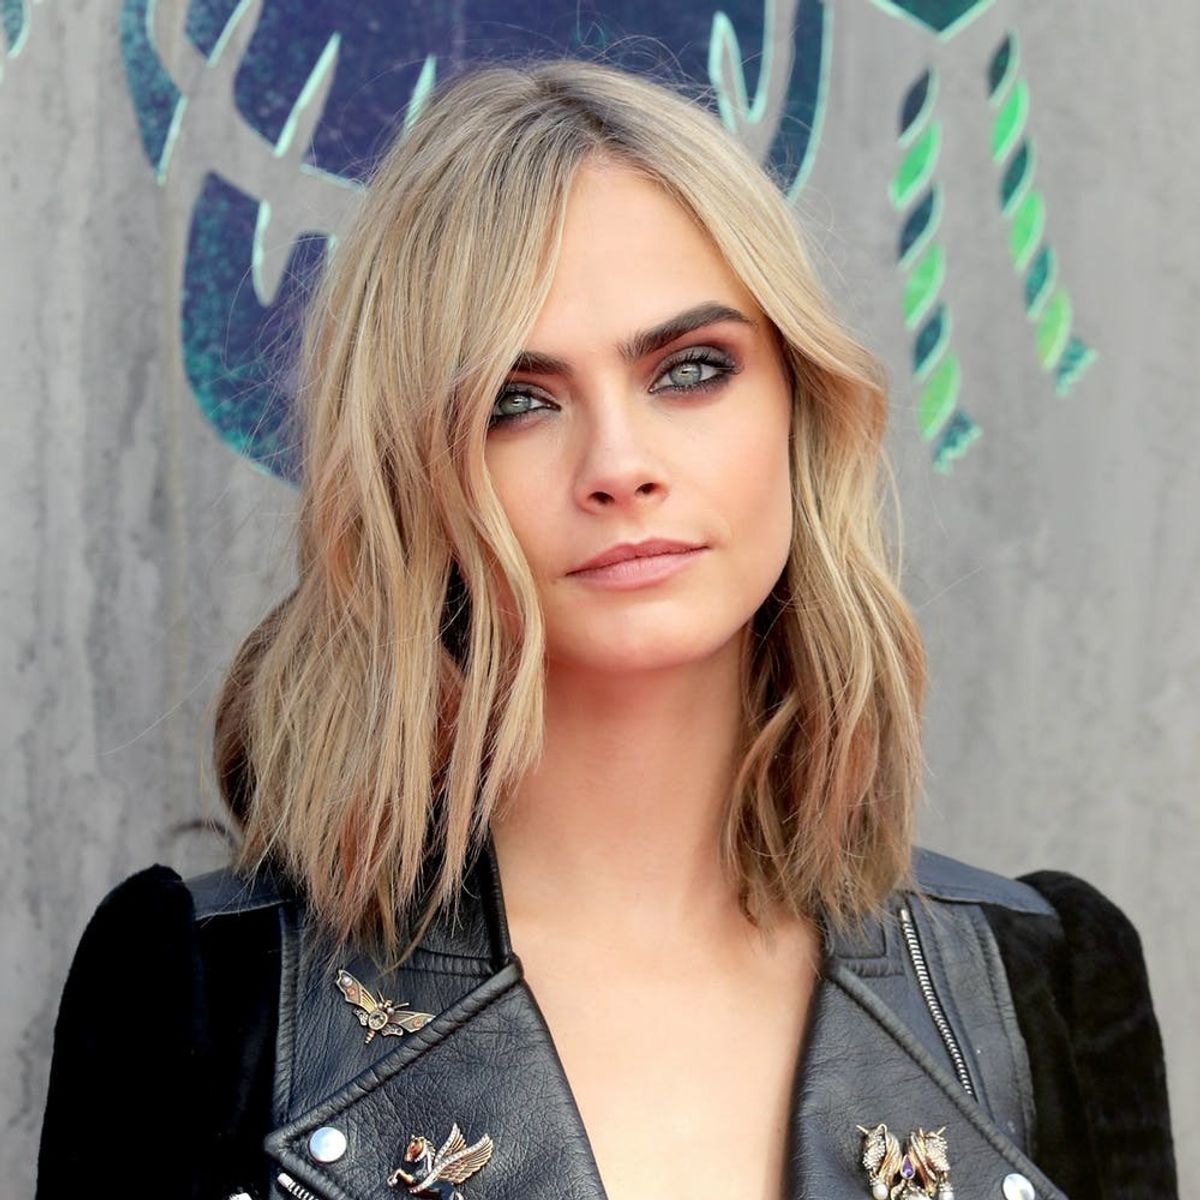 Victoria’s Secret Is Sticking Up for Cara Delevingne After Some Less-Than-Flattering Body Rumors